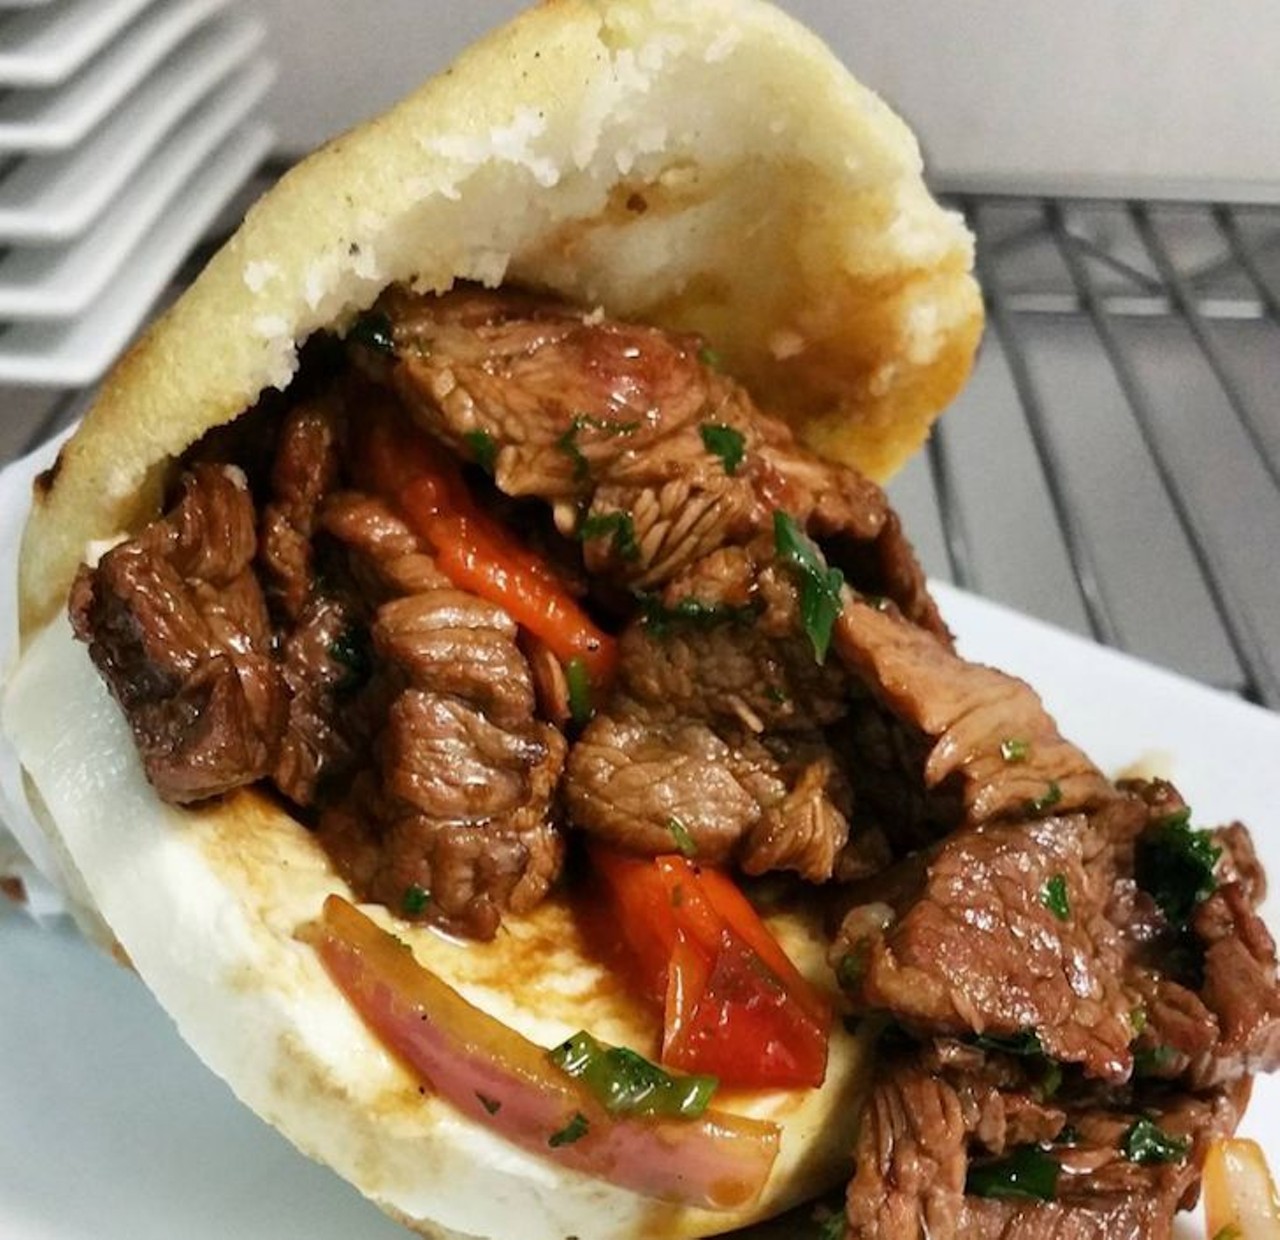 Must  try: Satisfy your Latin-food cravings with thick, crispy arepas stuffed with flavorful beef. 
Photo via bocasgrill//Instagram